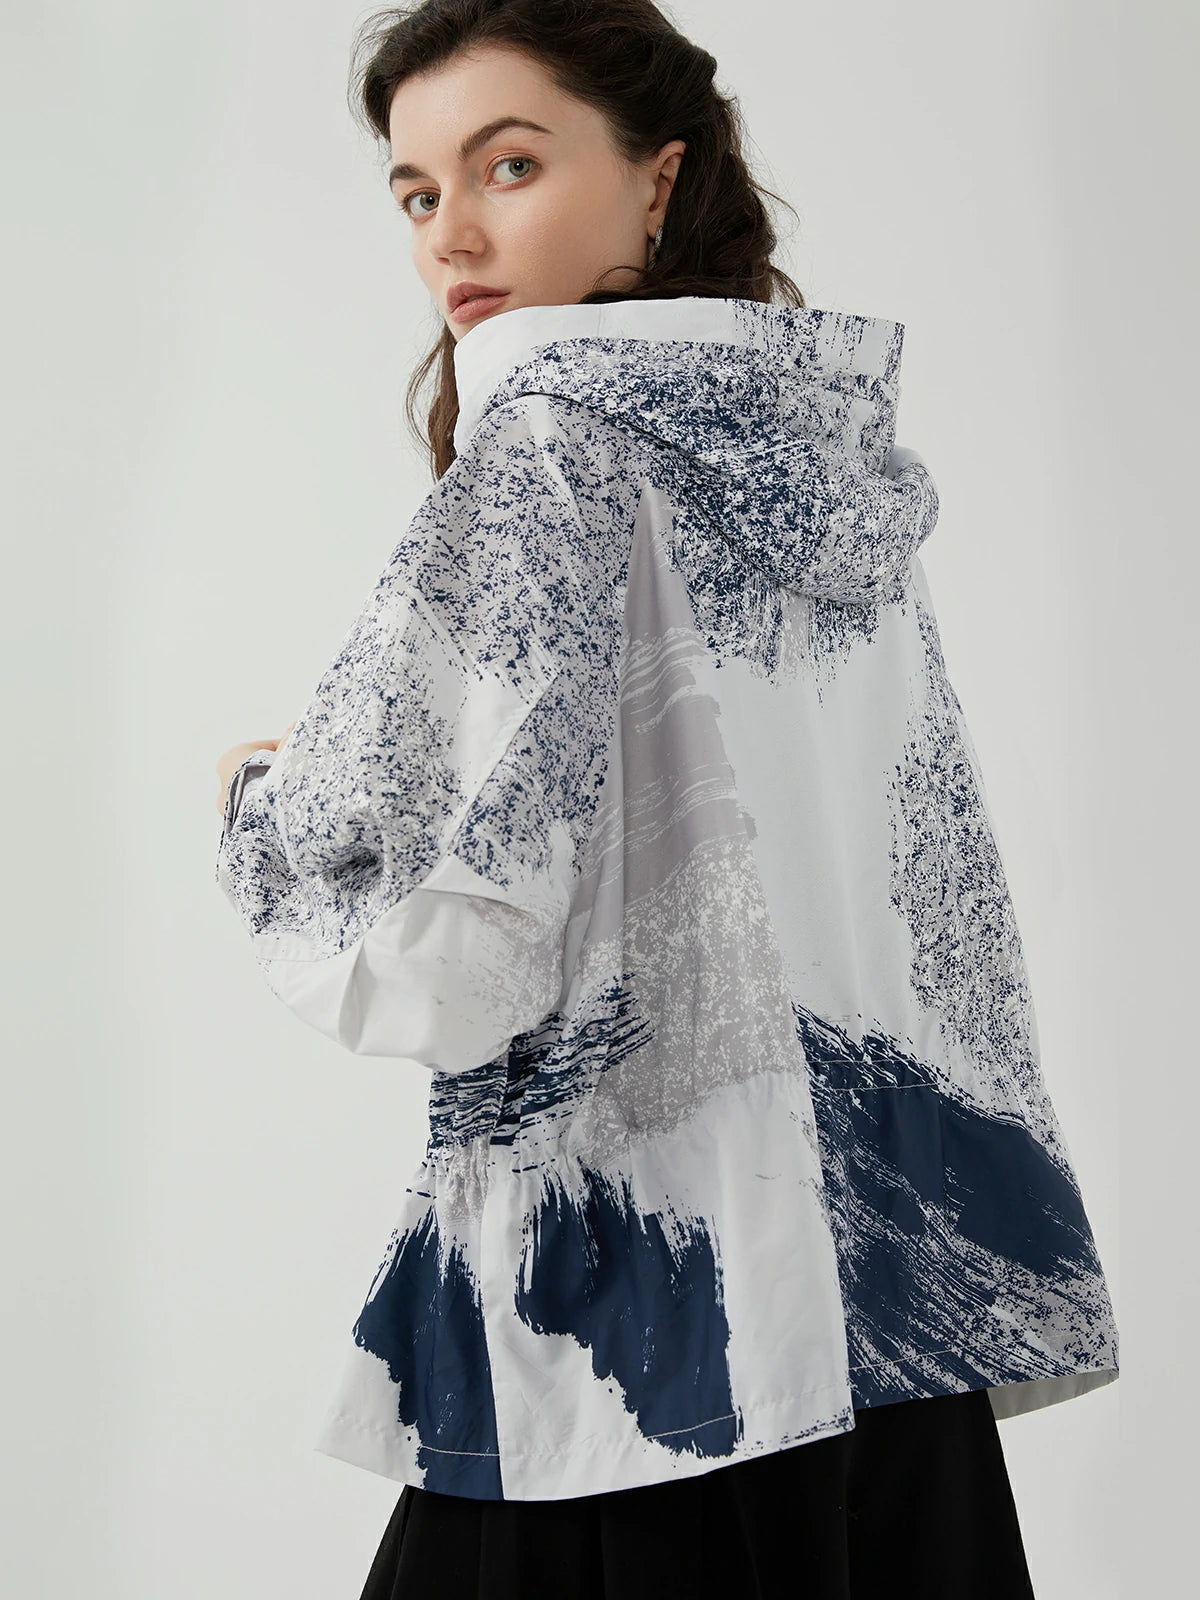 High-neck hooded jacket with contrast color printing